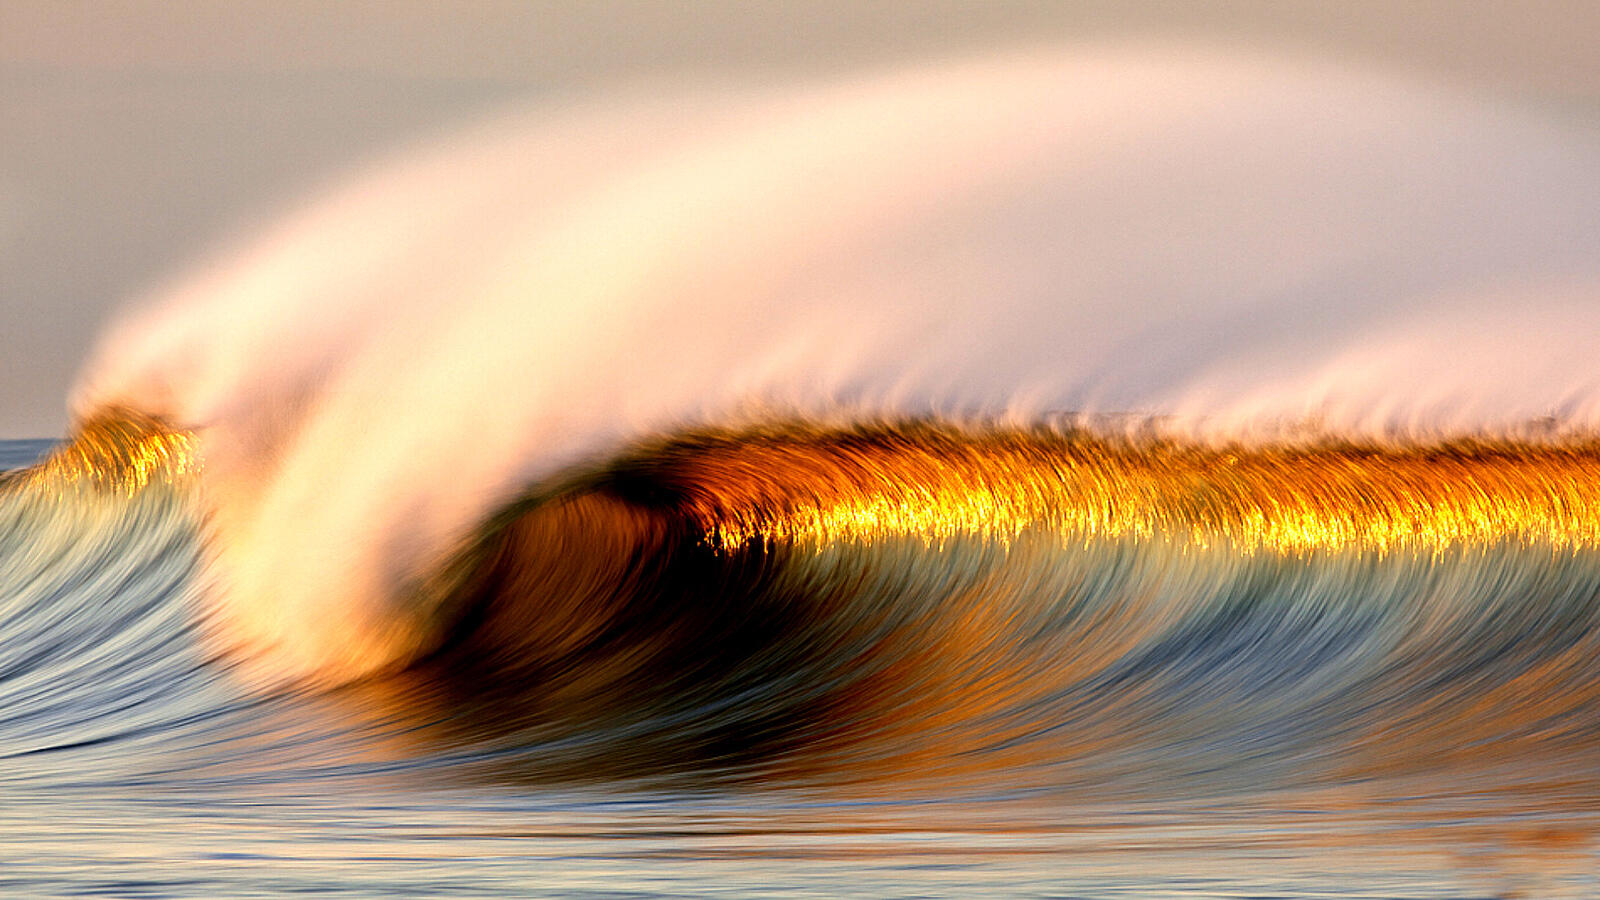 Free photo A large wave changes color from sunlight